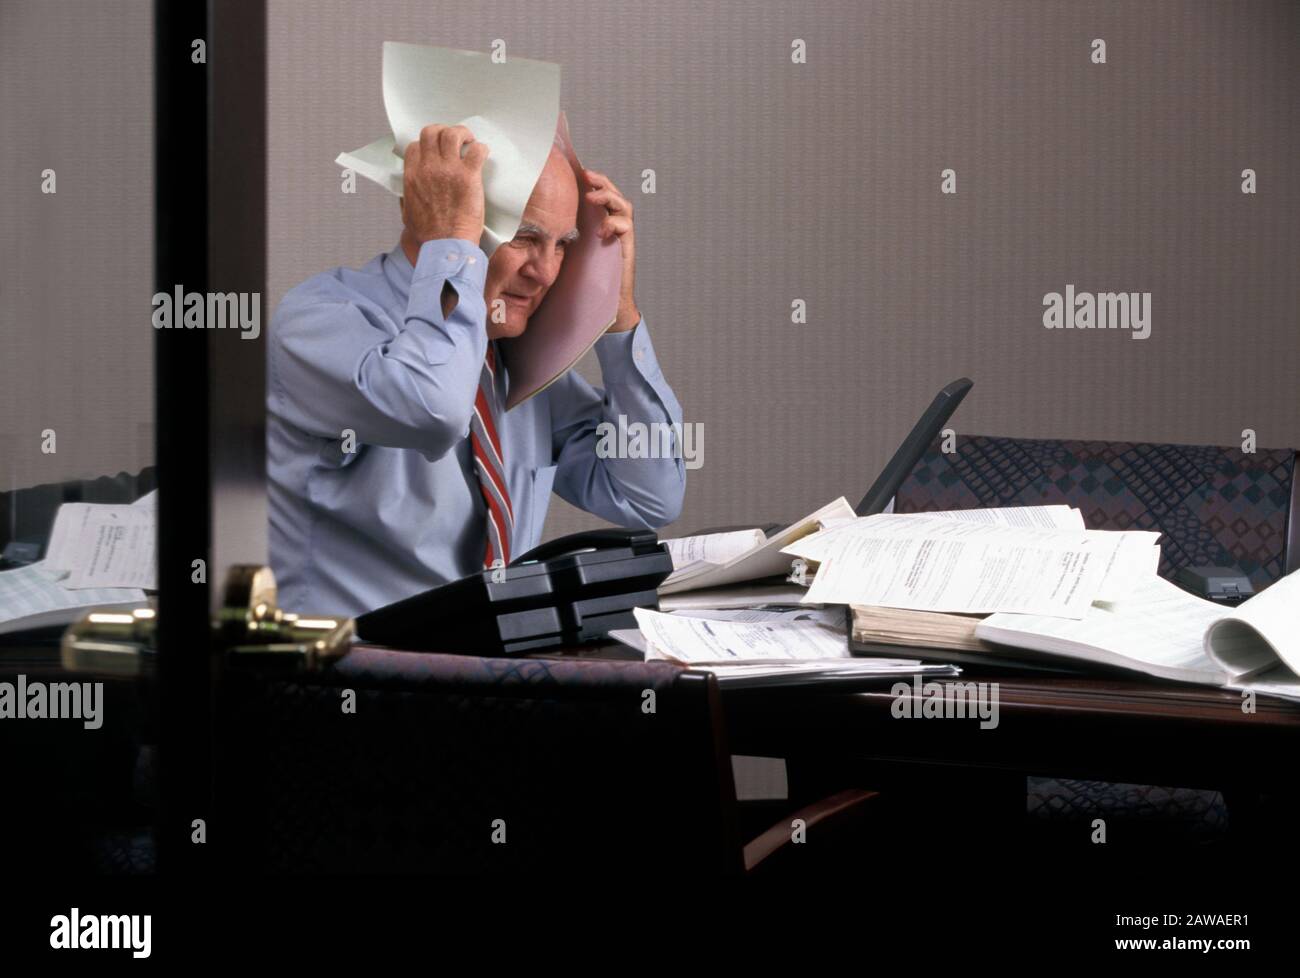 Stressed businessman with too much paperwork Stock Photo